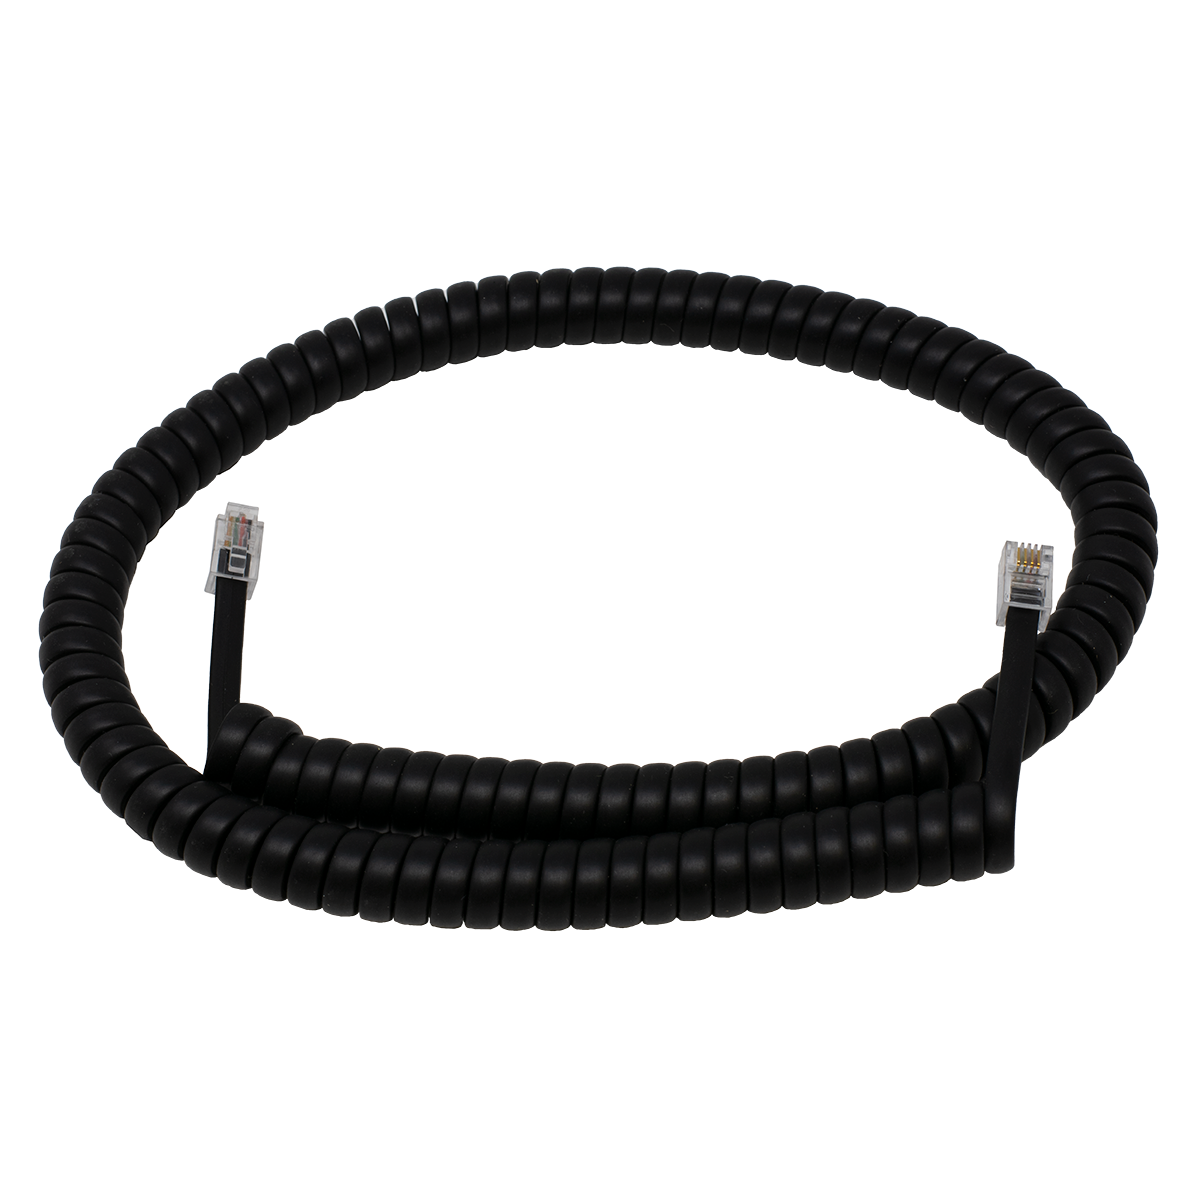 12' Flat Black Coiled Handset Cord